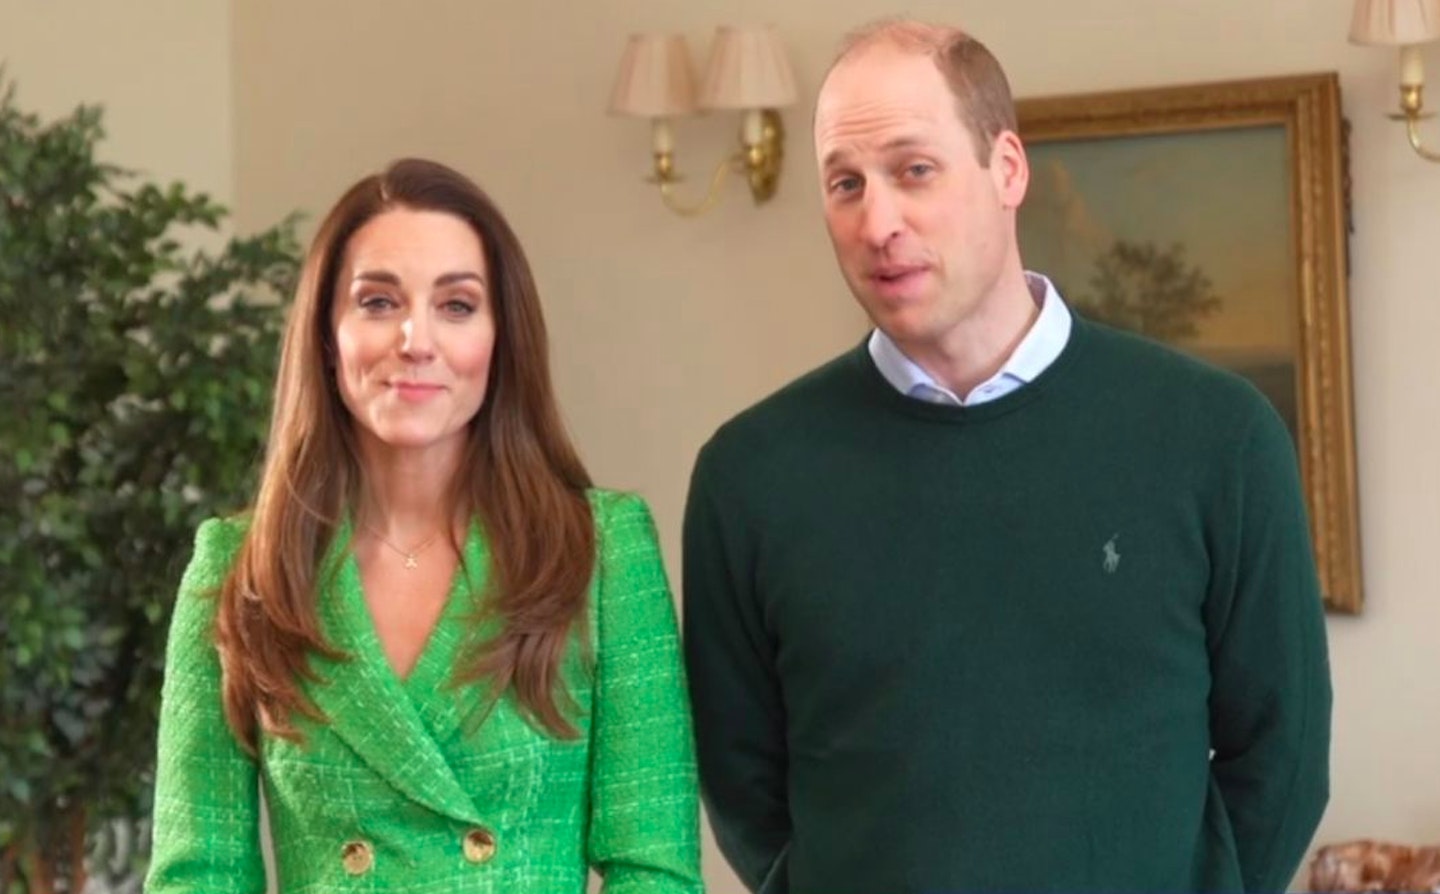 Kate Middleton Had a Secret Style Hack for St. Patrick's Day Parade